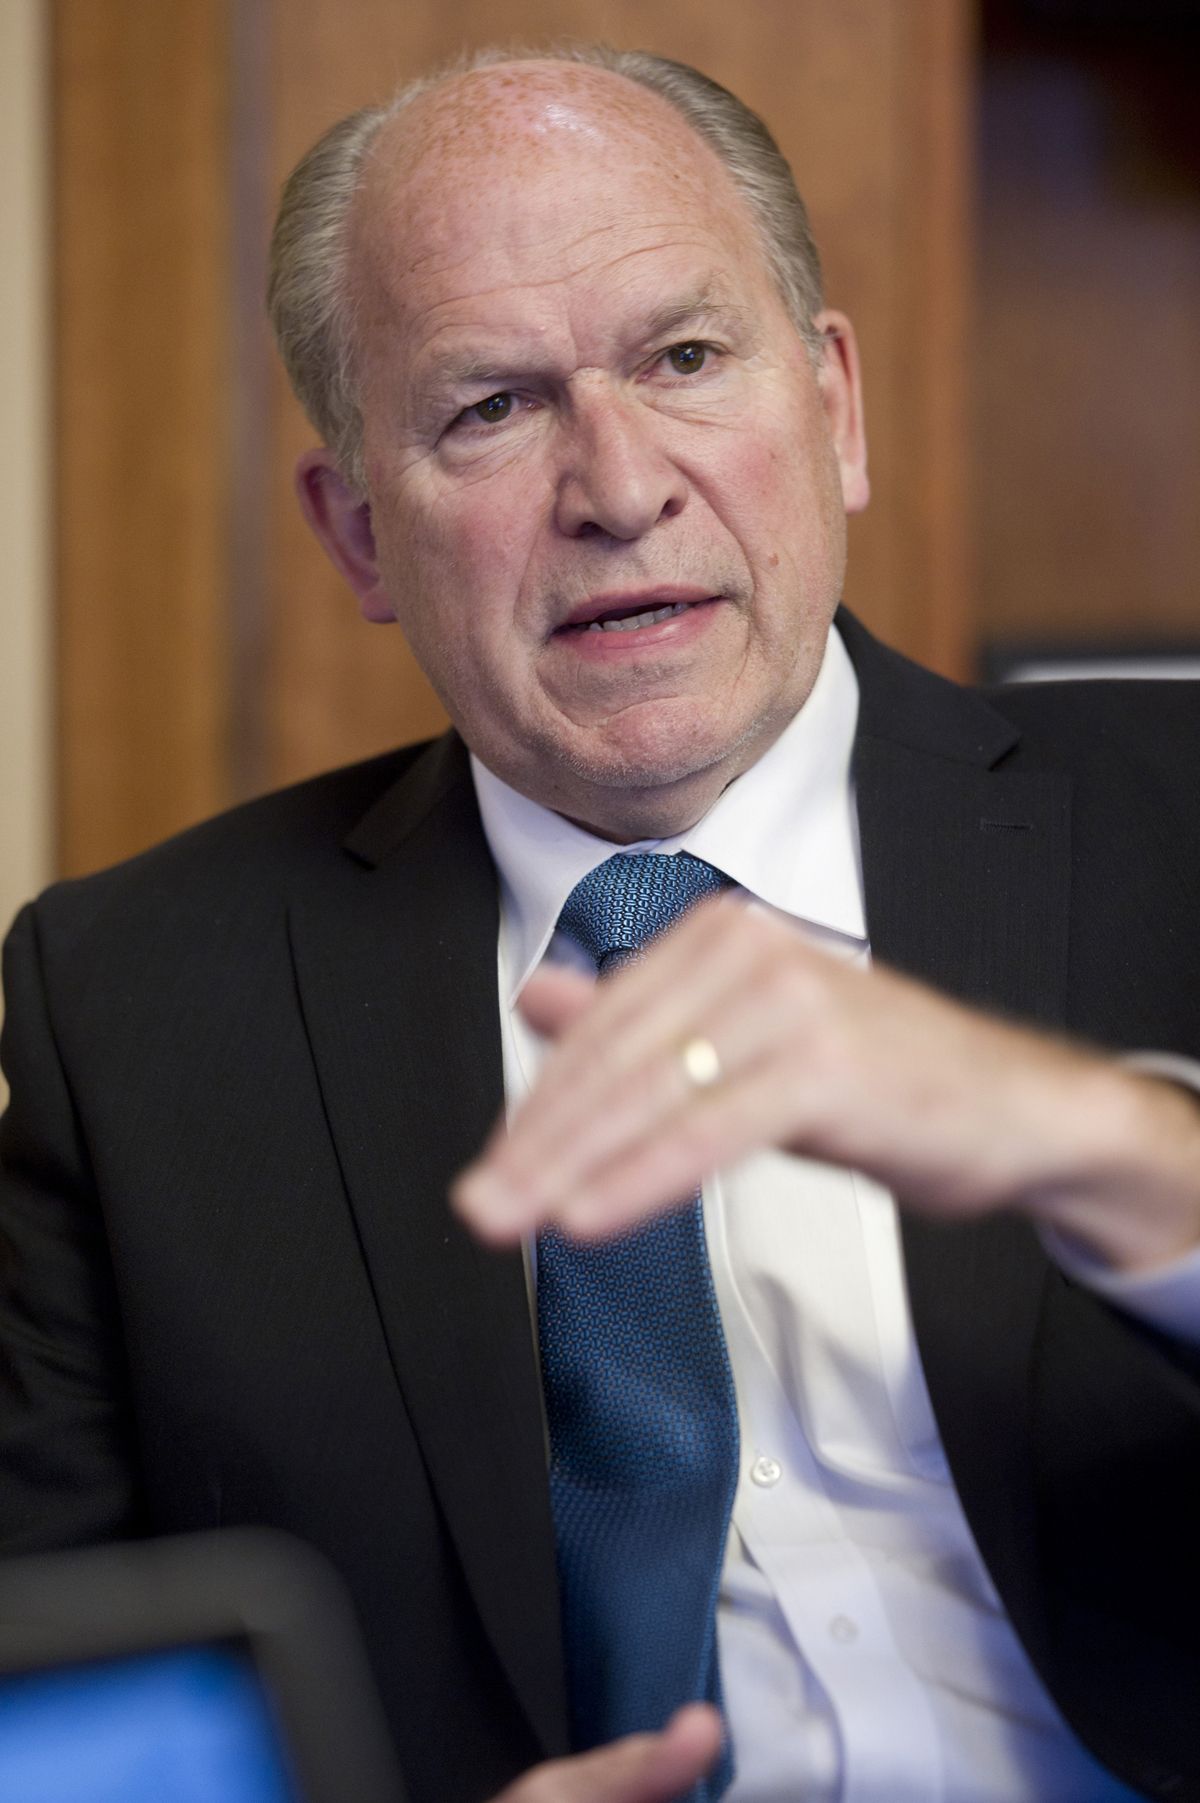 Gov. Bill Walker will give his State of the State address at 7 p.m. tonight.